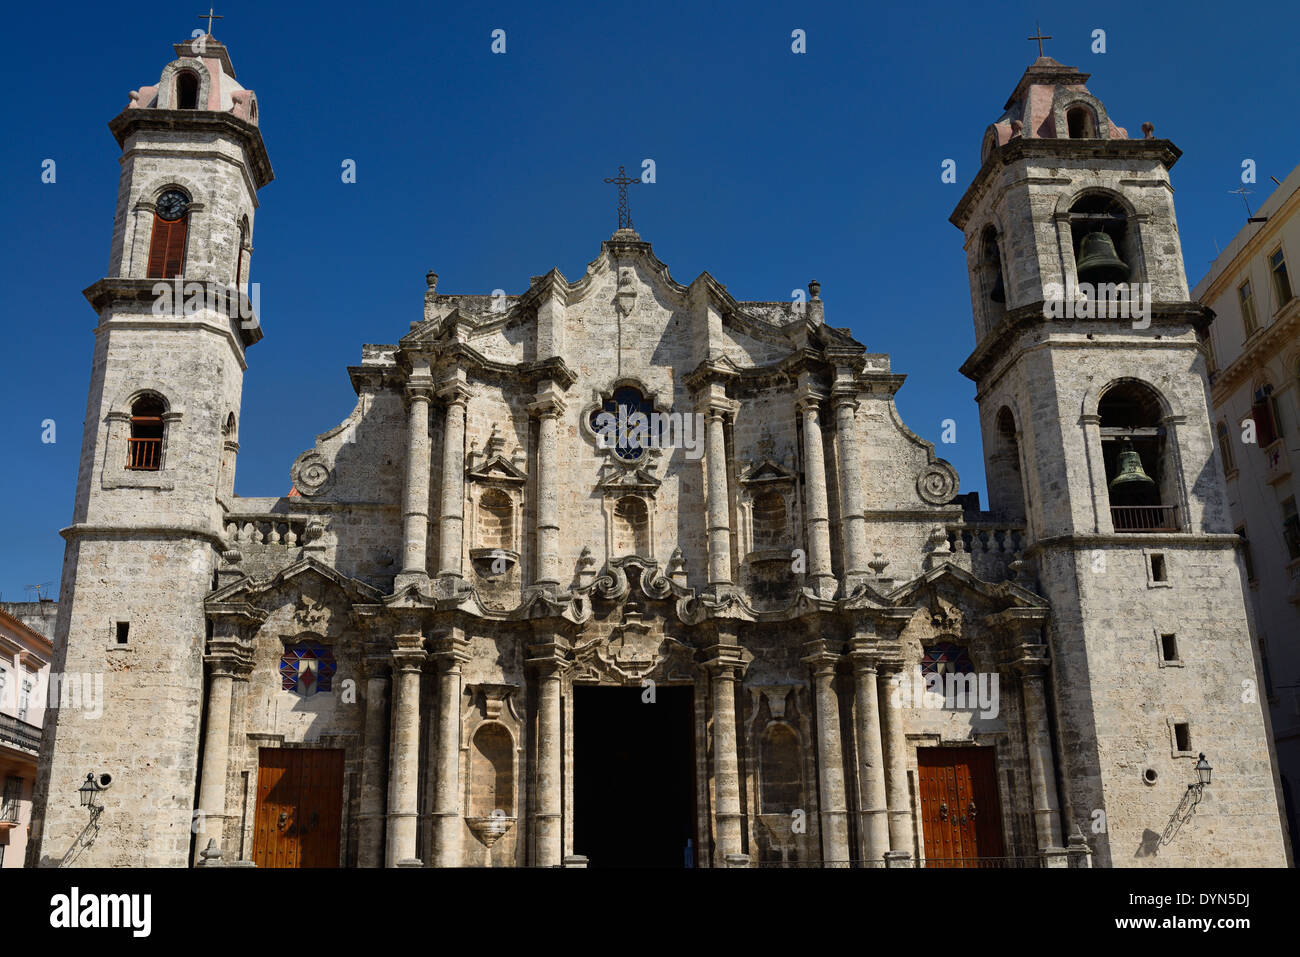 Front of the Havana Virgin Mary of the Immaculate Conception Roman Catholic Cathedral with clock and bell towers against a blue sky Cuba Stock Photo